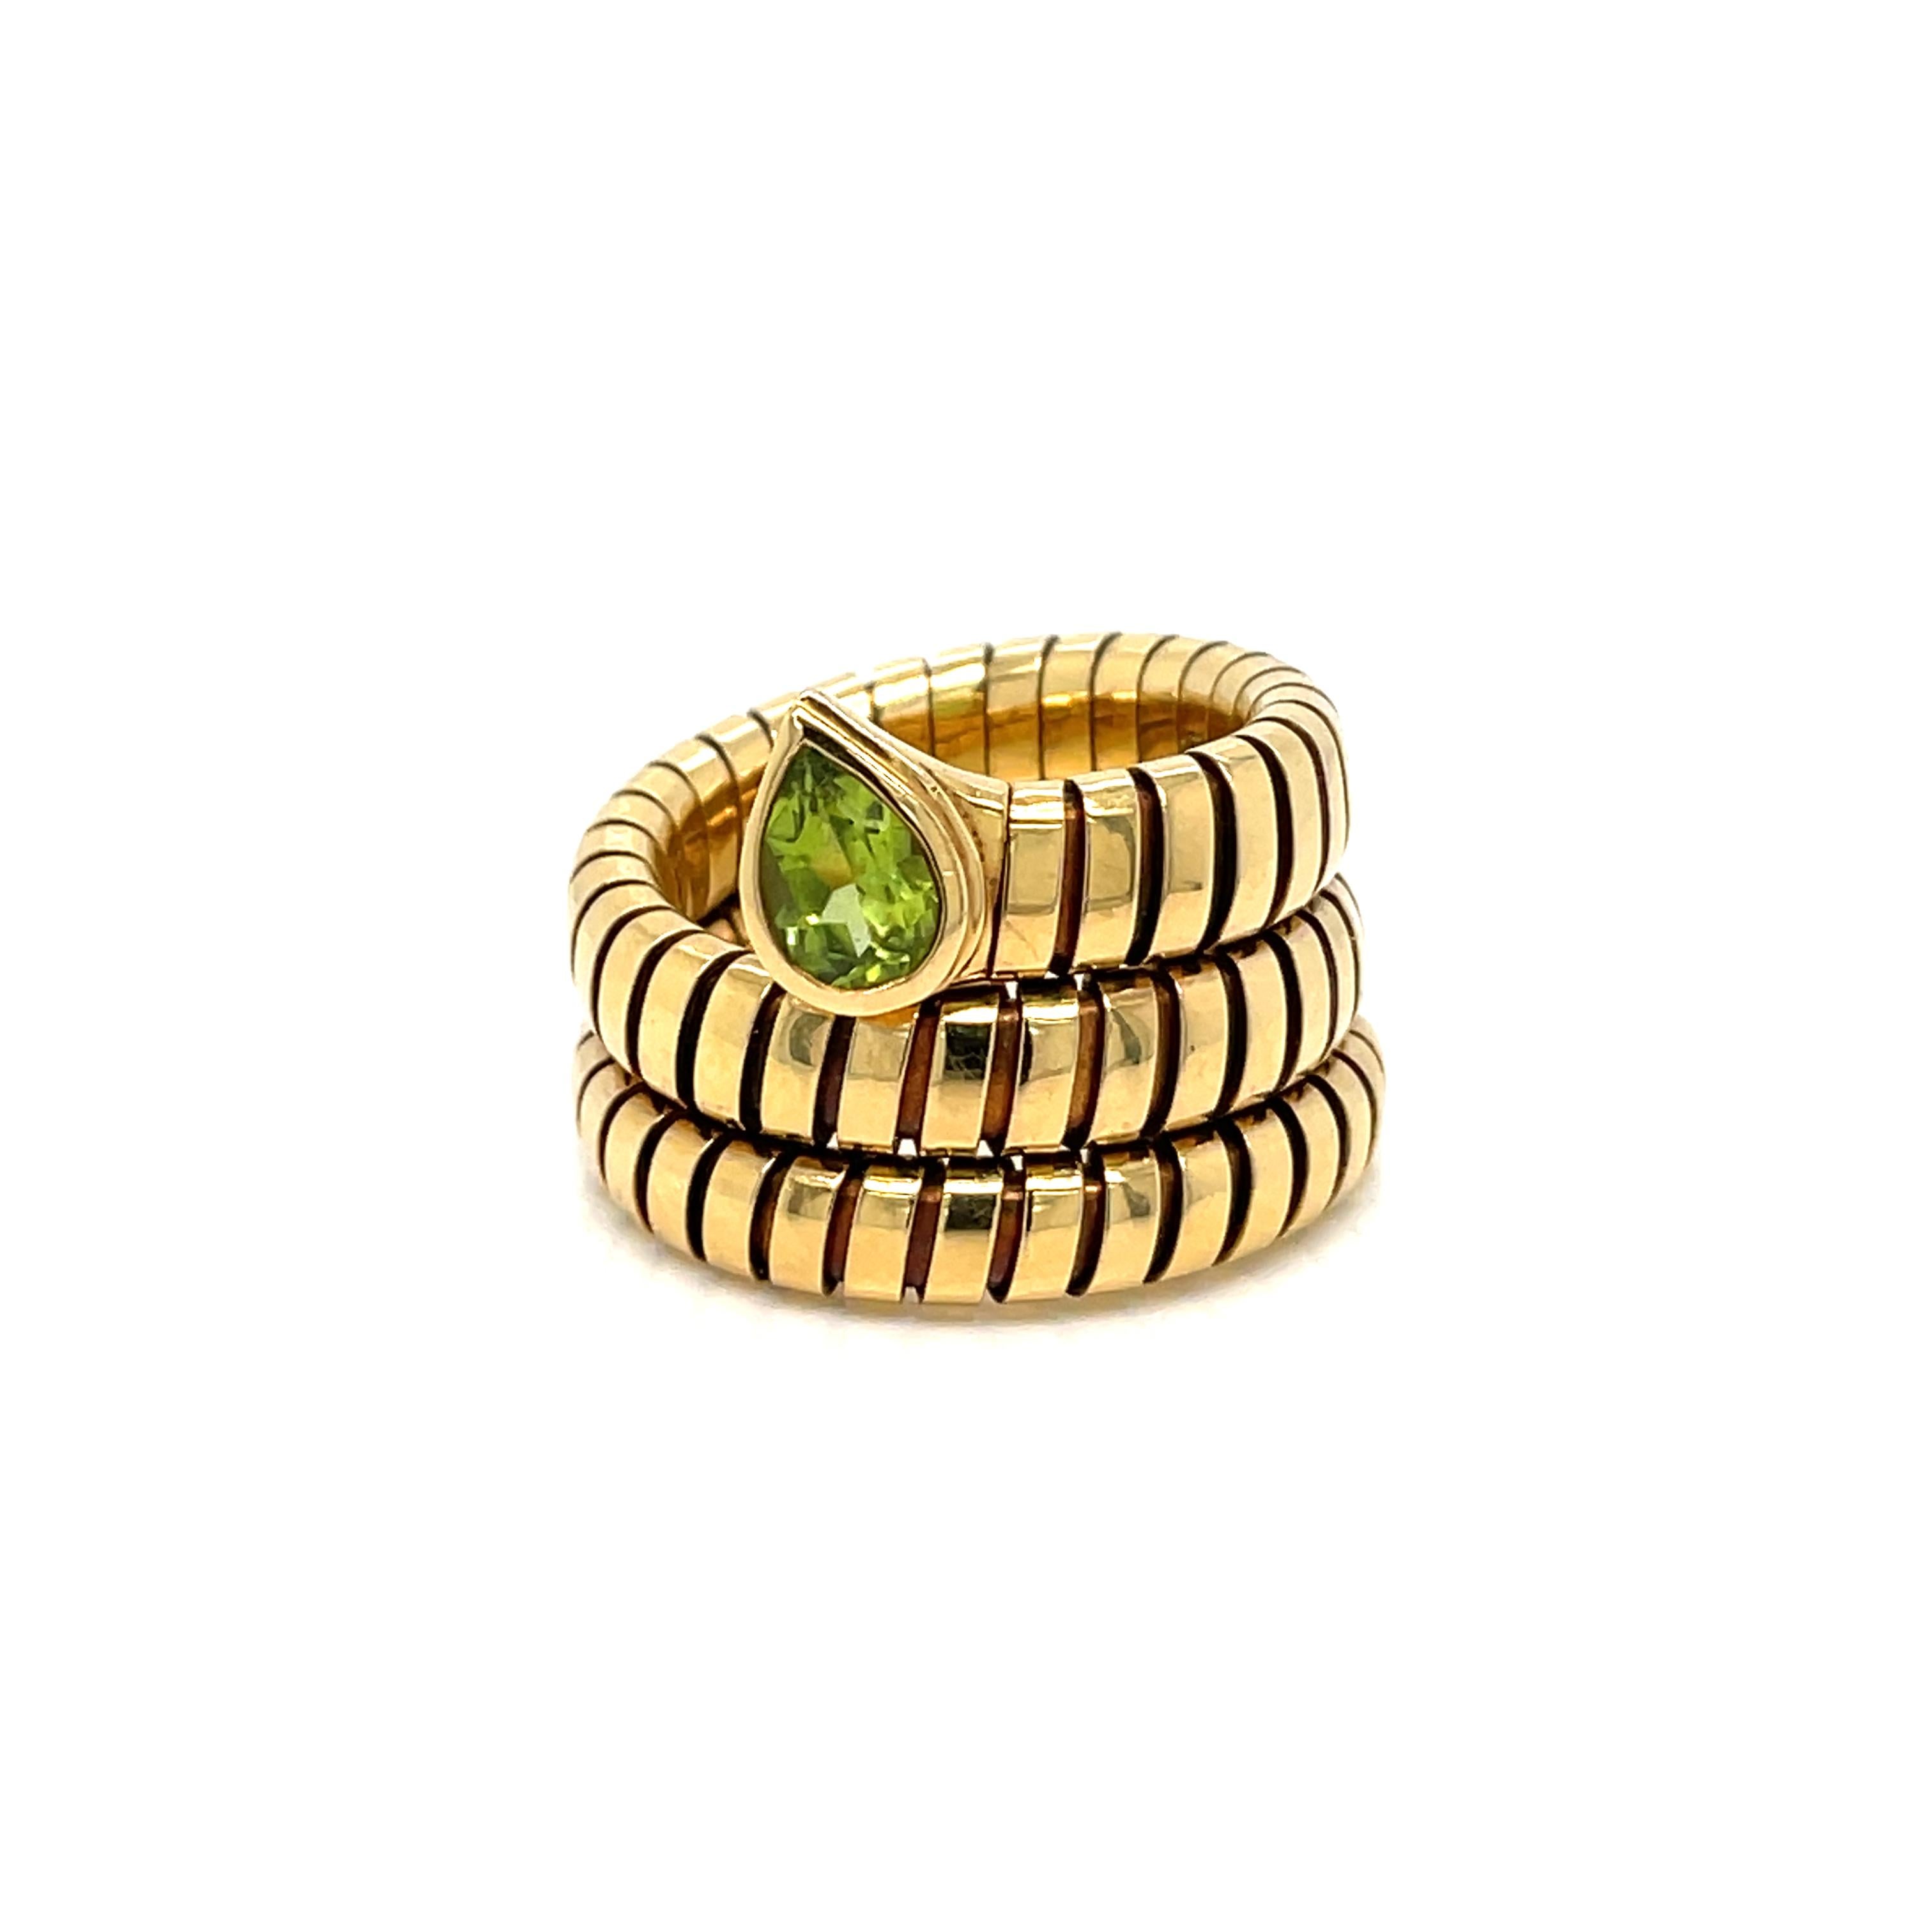 An iconic Bulgari Tubogas ring circa 1980's showcasing 18k yellow gold in a perfectly balanced ring, set with a fancy pear-cut Peridot 
The ring measures a size 6. The flexible nature of this ring allows some play in regards to size.
Hallmarks: